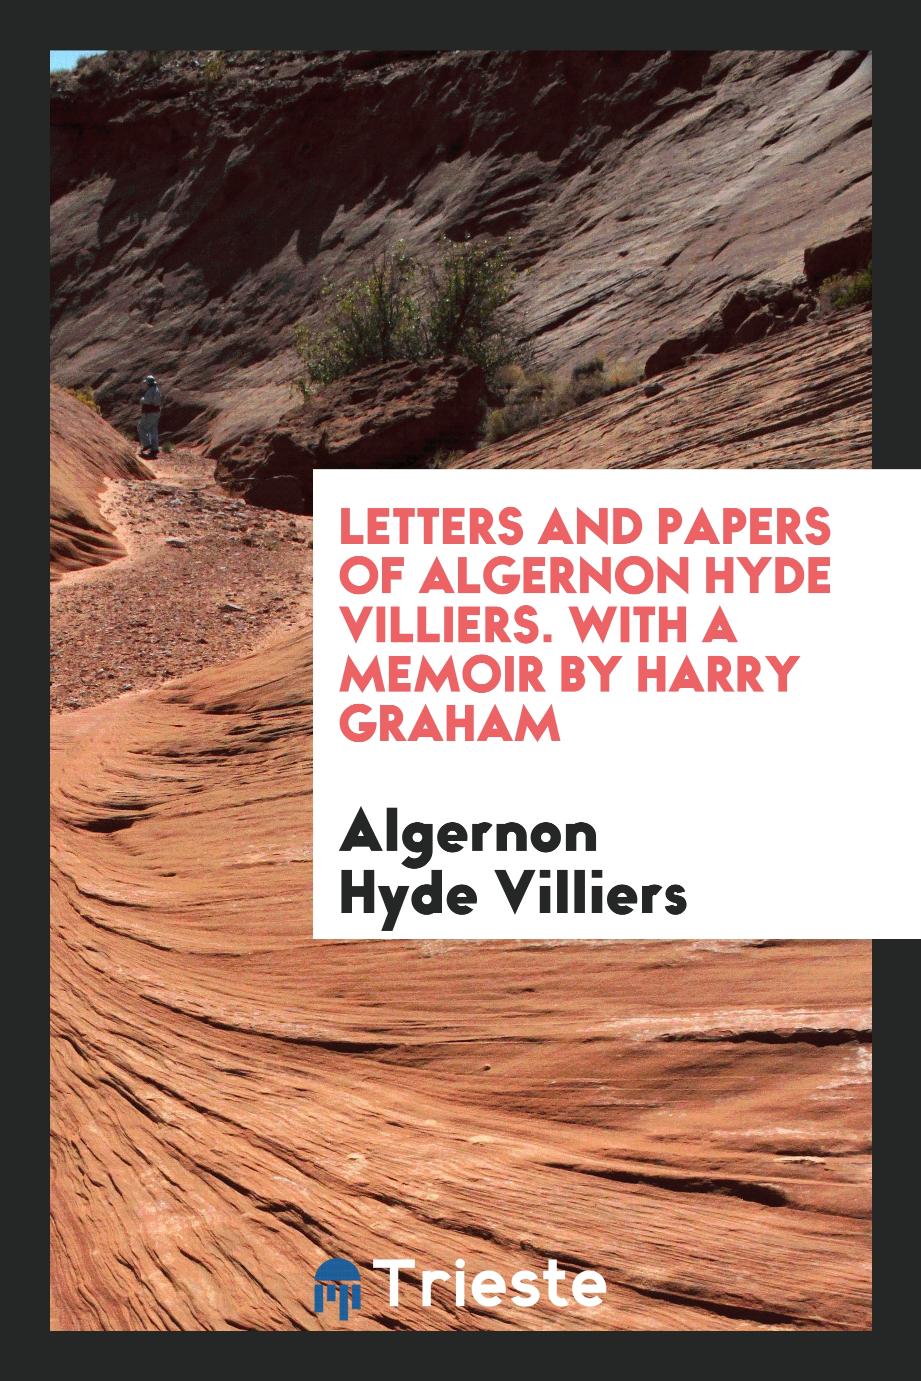 Letters and papers of Algernon Hyde Villiers. With a memoir by Harry Graham